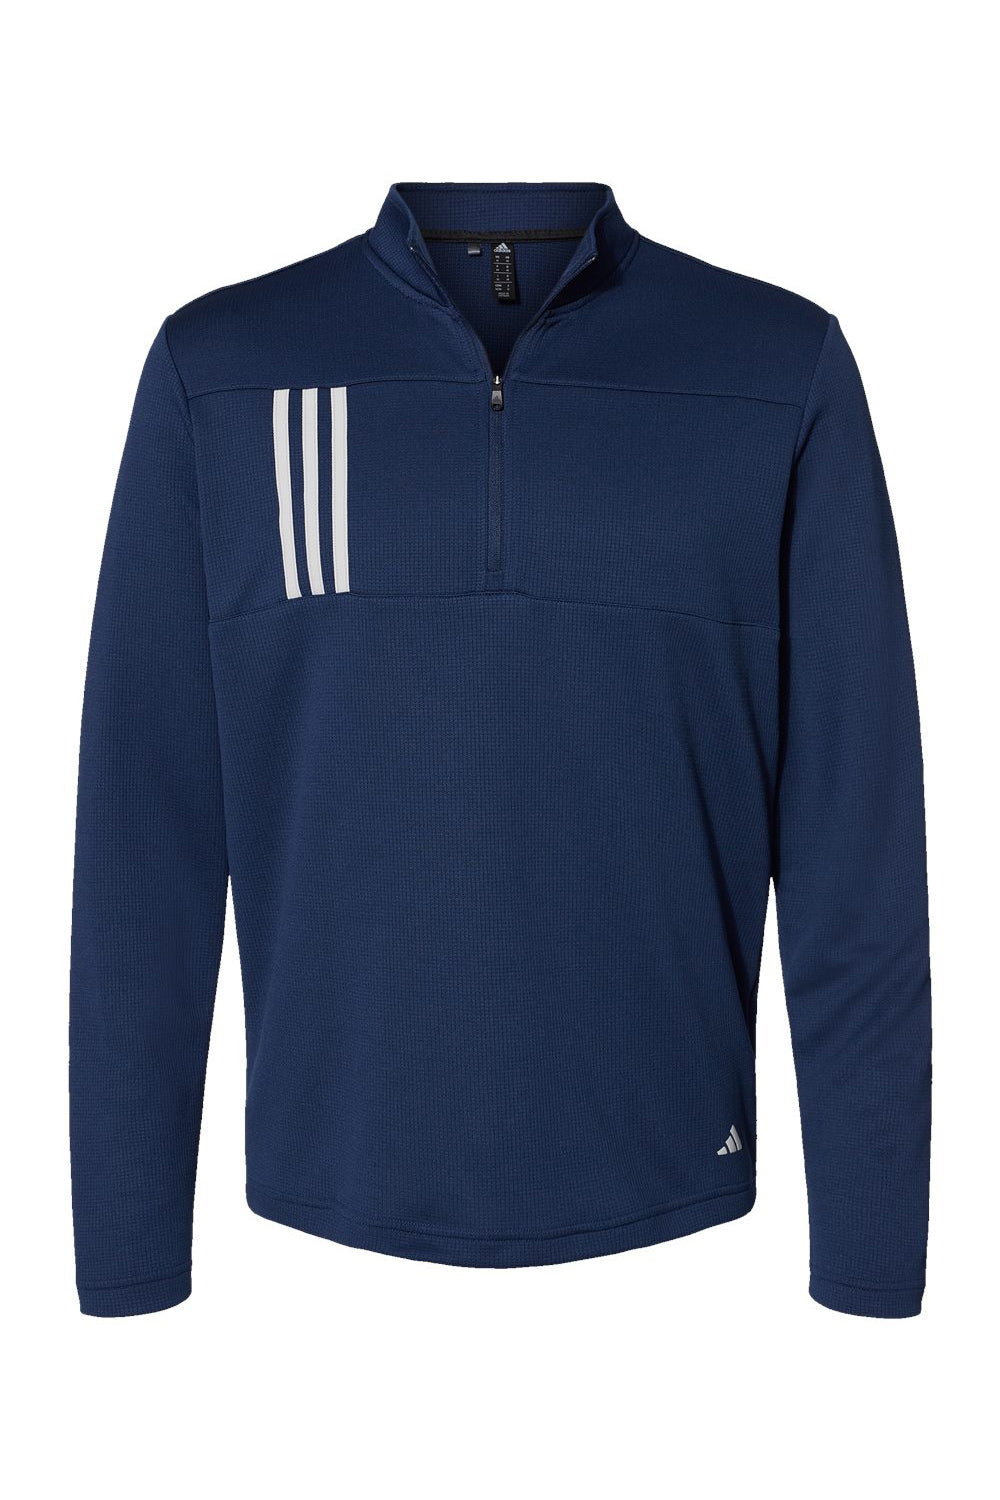 Adidas A482 Mens 3 Stripes Double Knit 1/4 Zip Pullover Team Navy Blue/Grey Flat Front